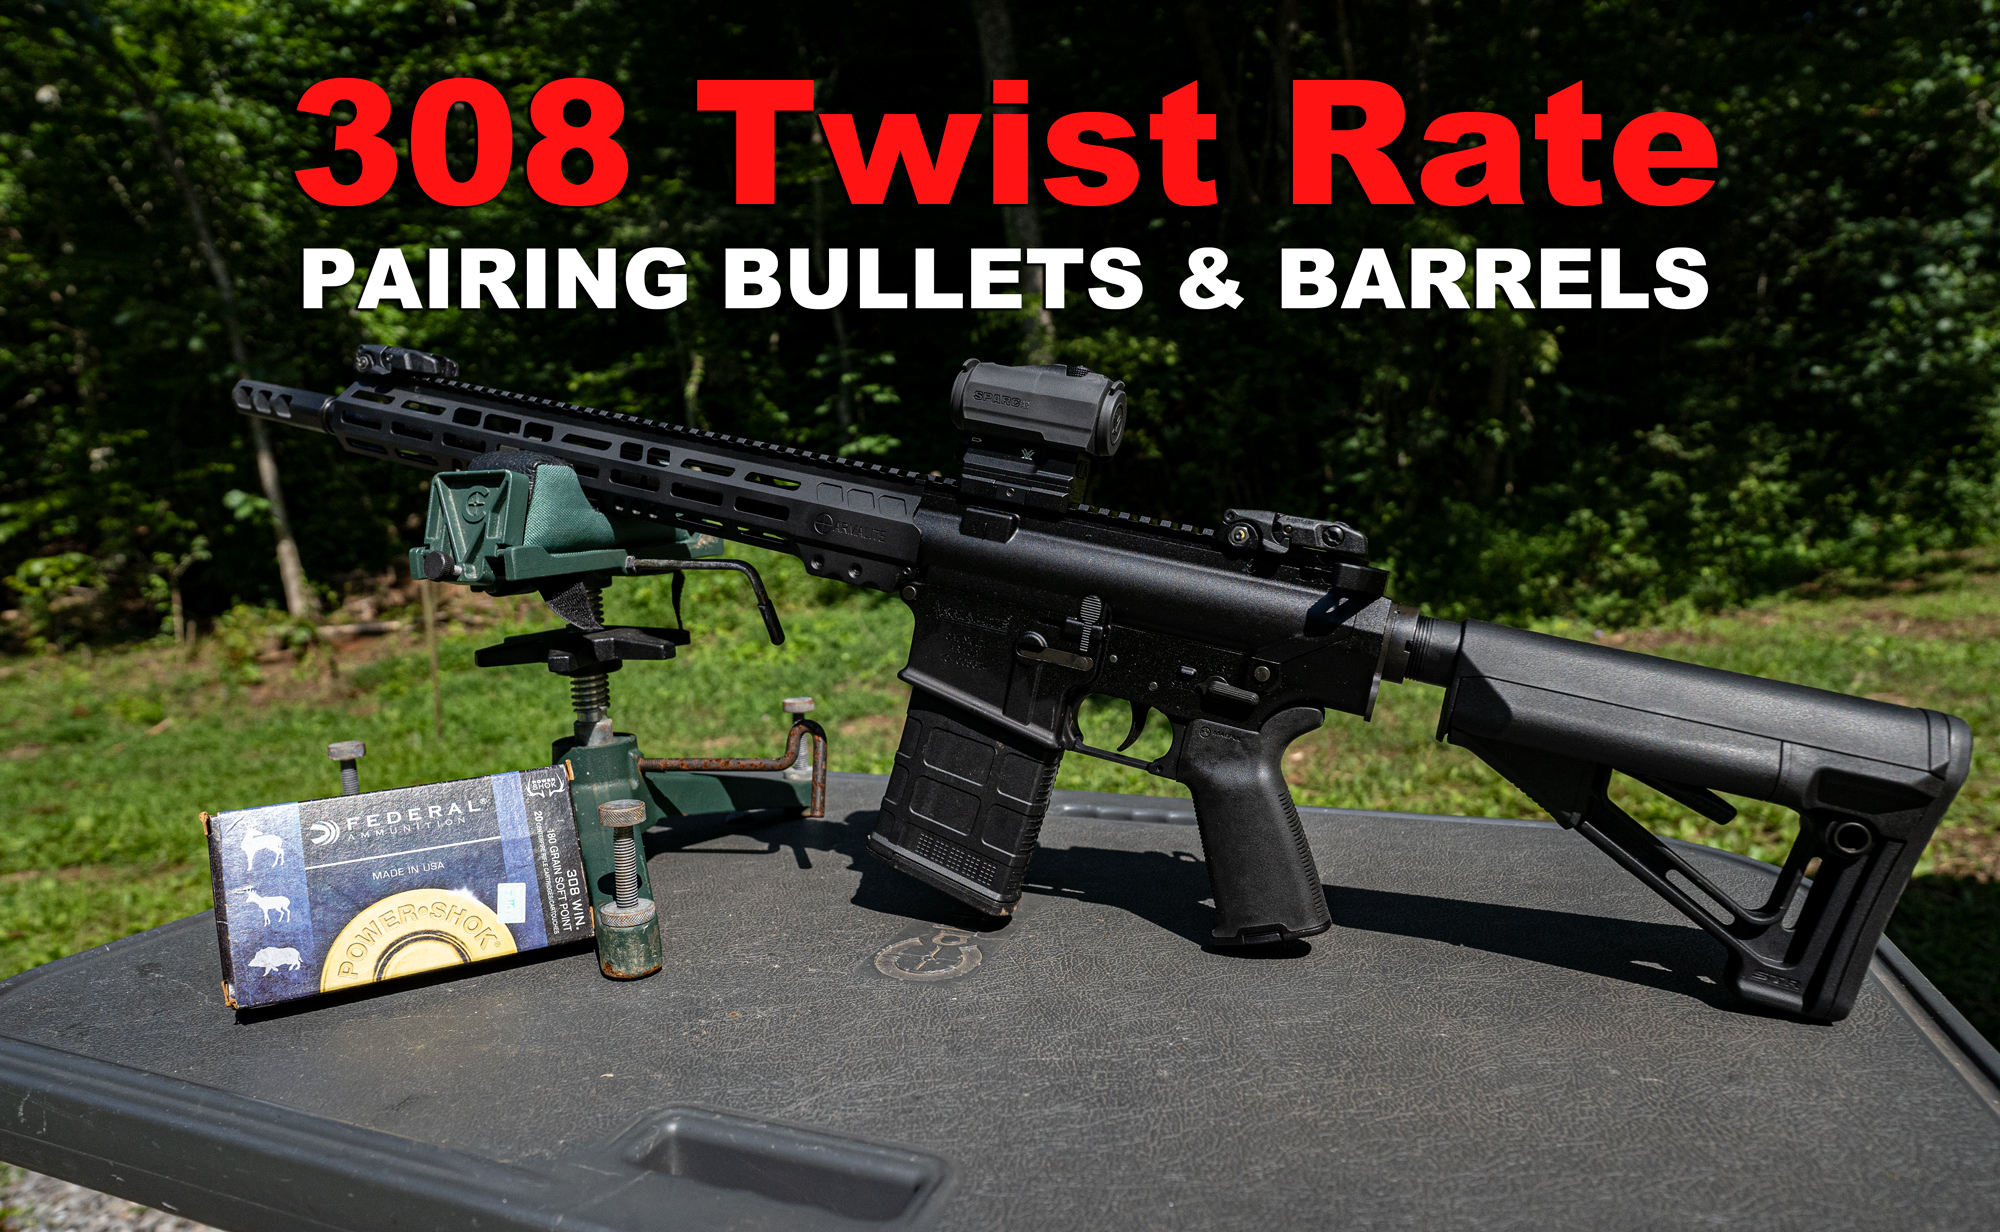 308 rifle and ammo on a shooting bench